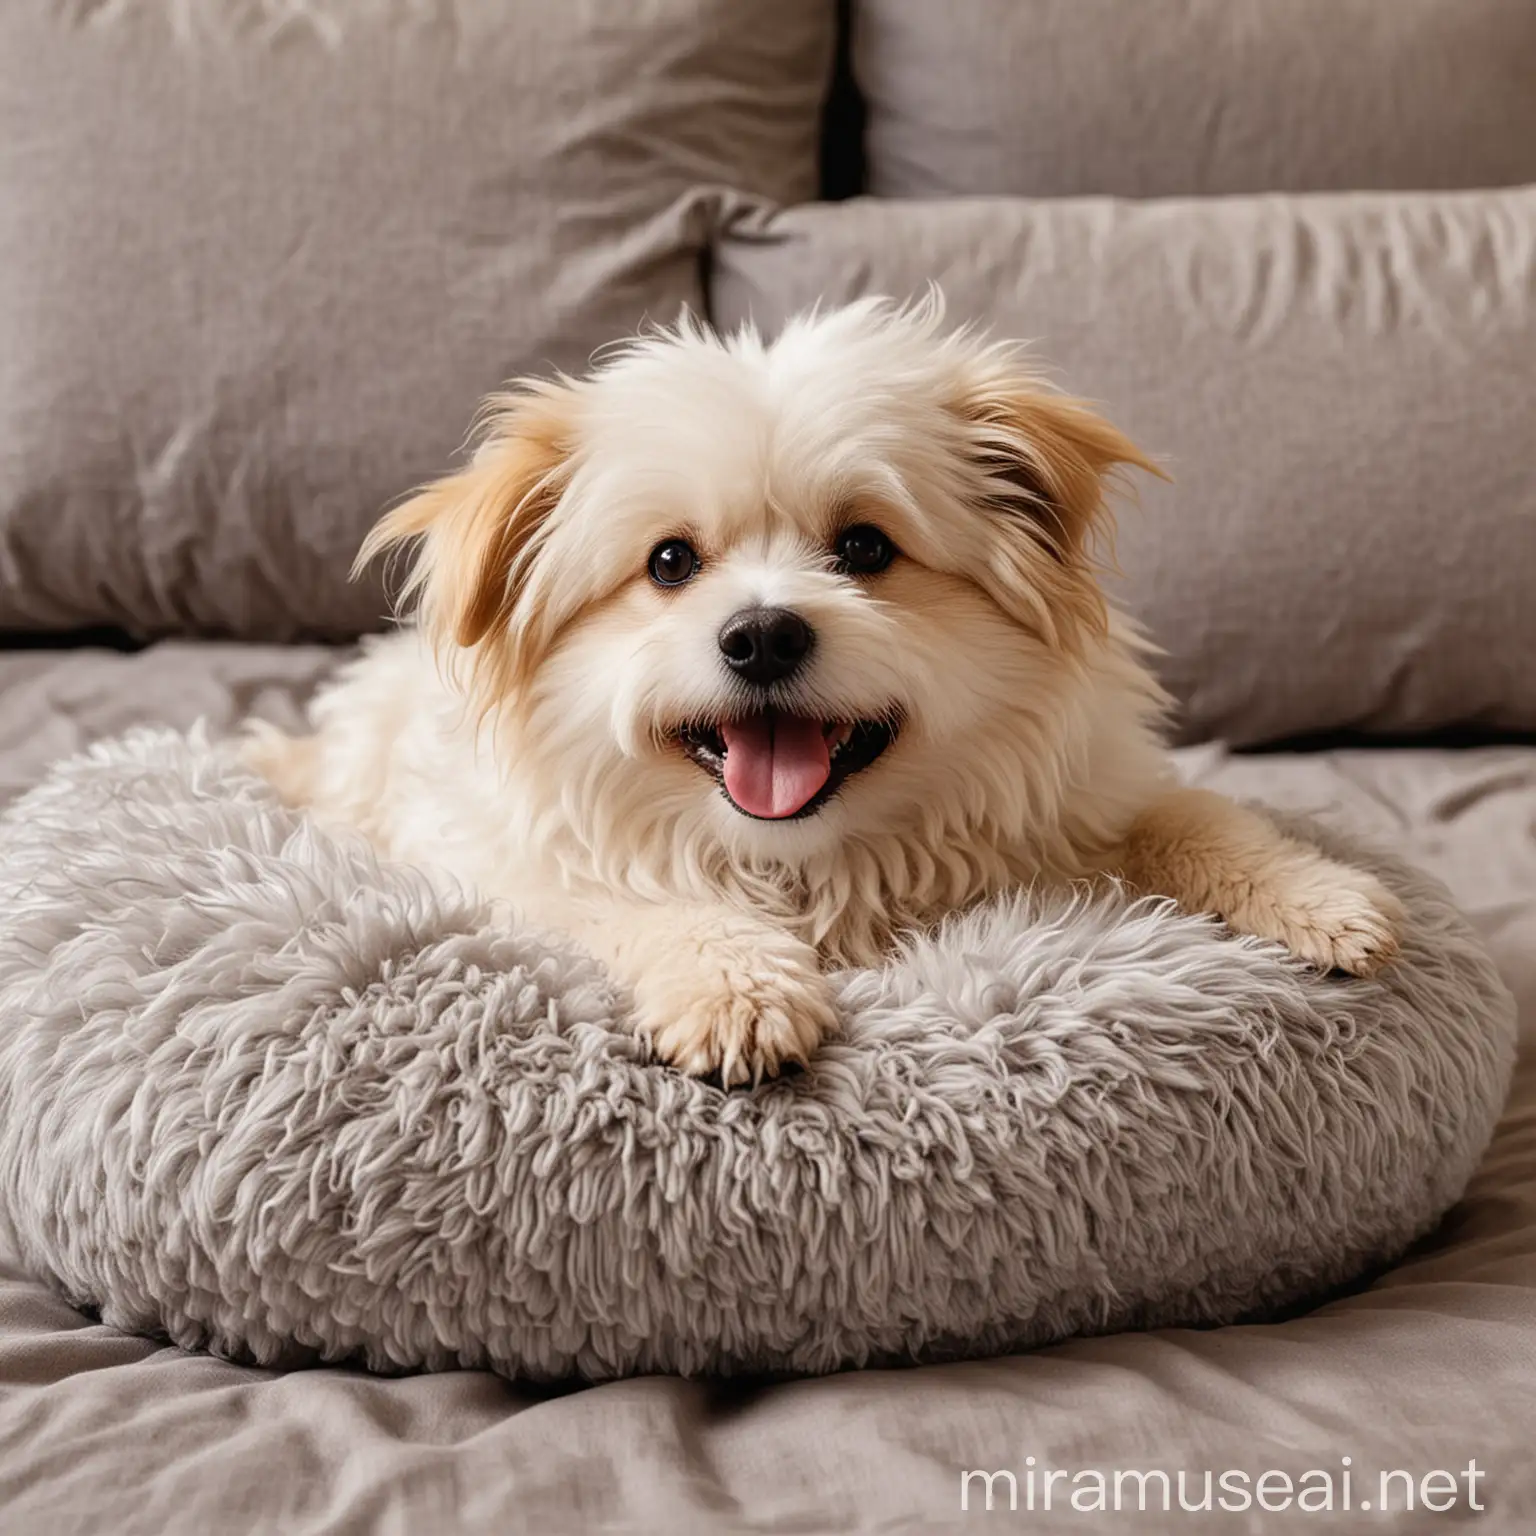 Fluffy Cheerful Dog Relaxing on a Cozy Pillow